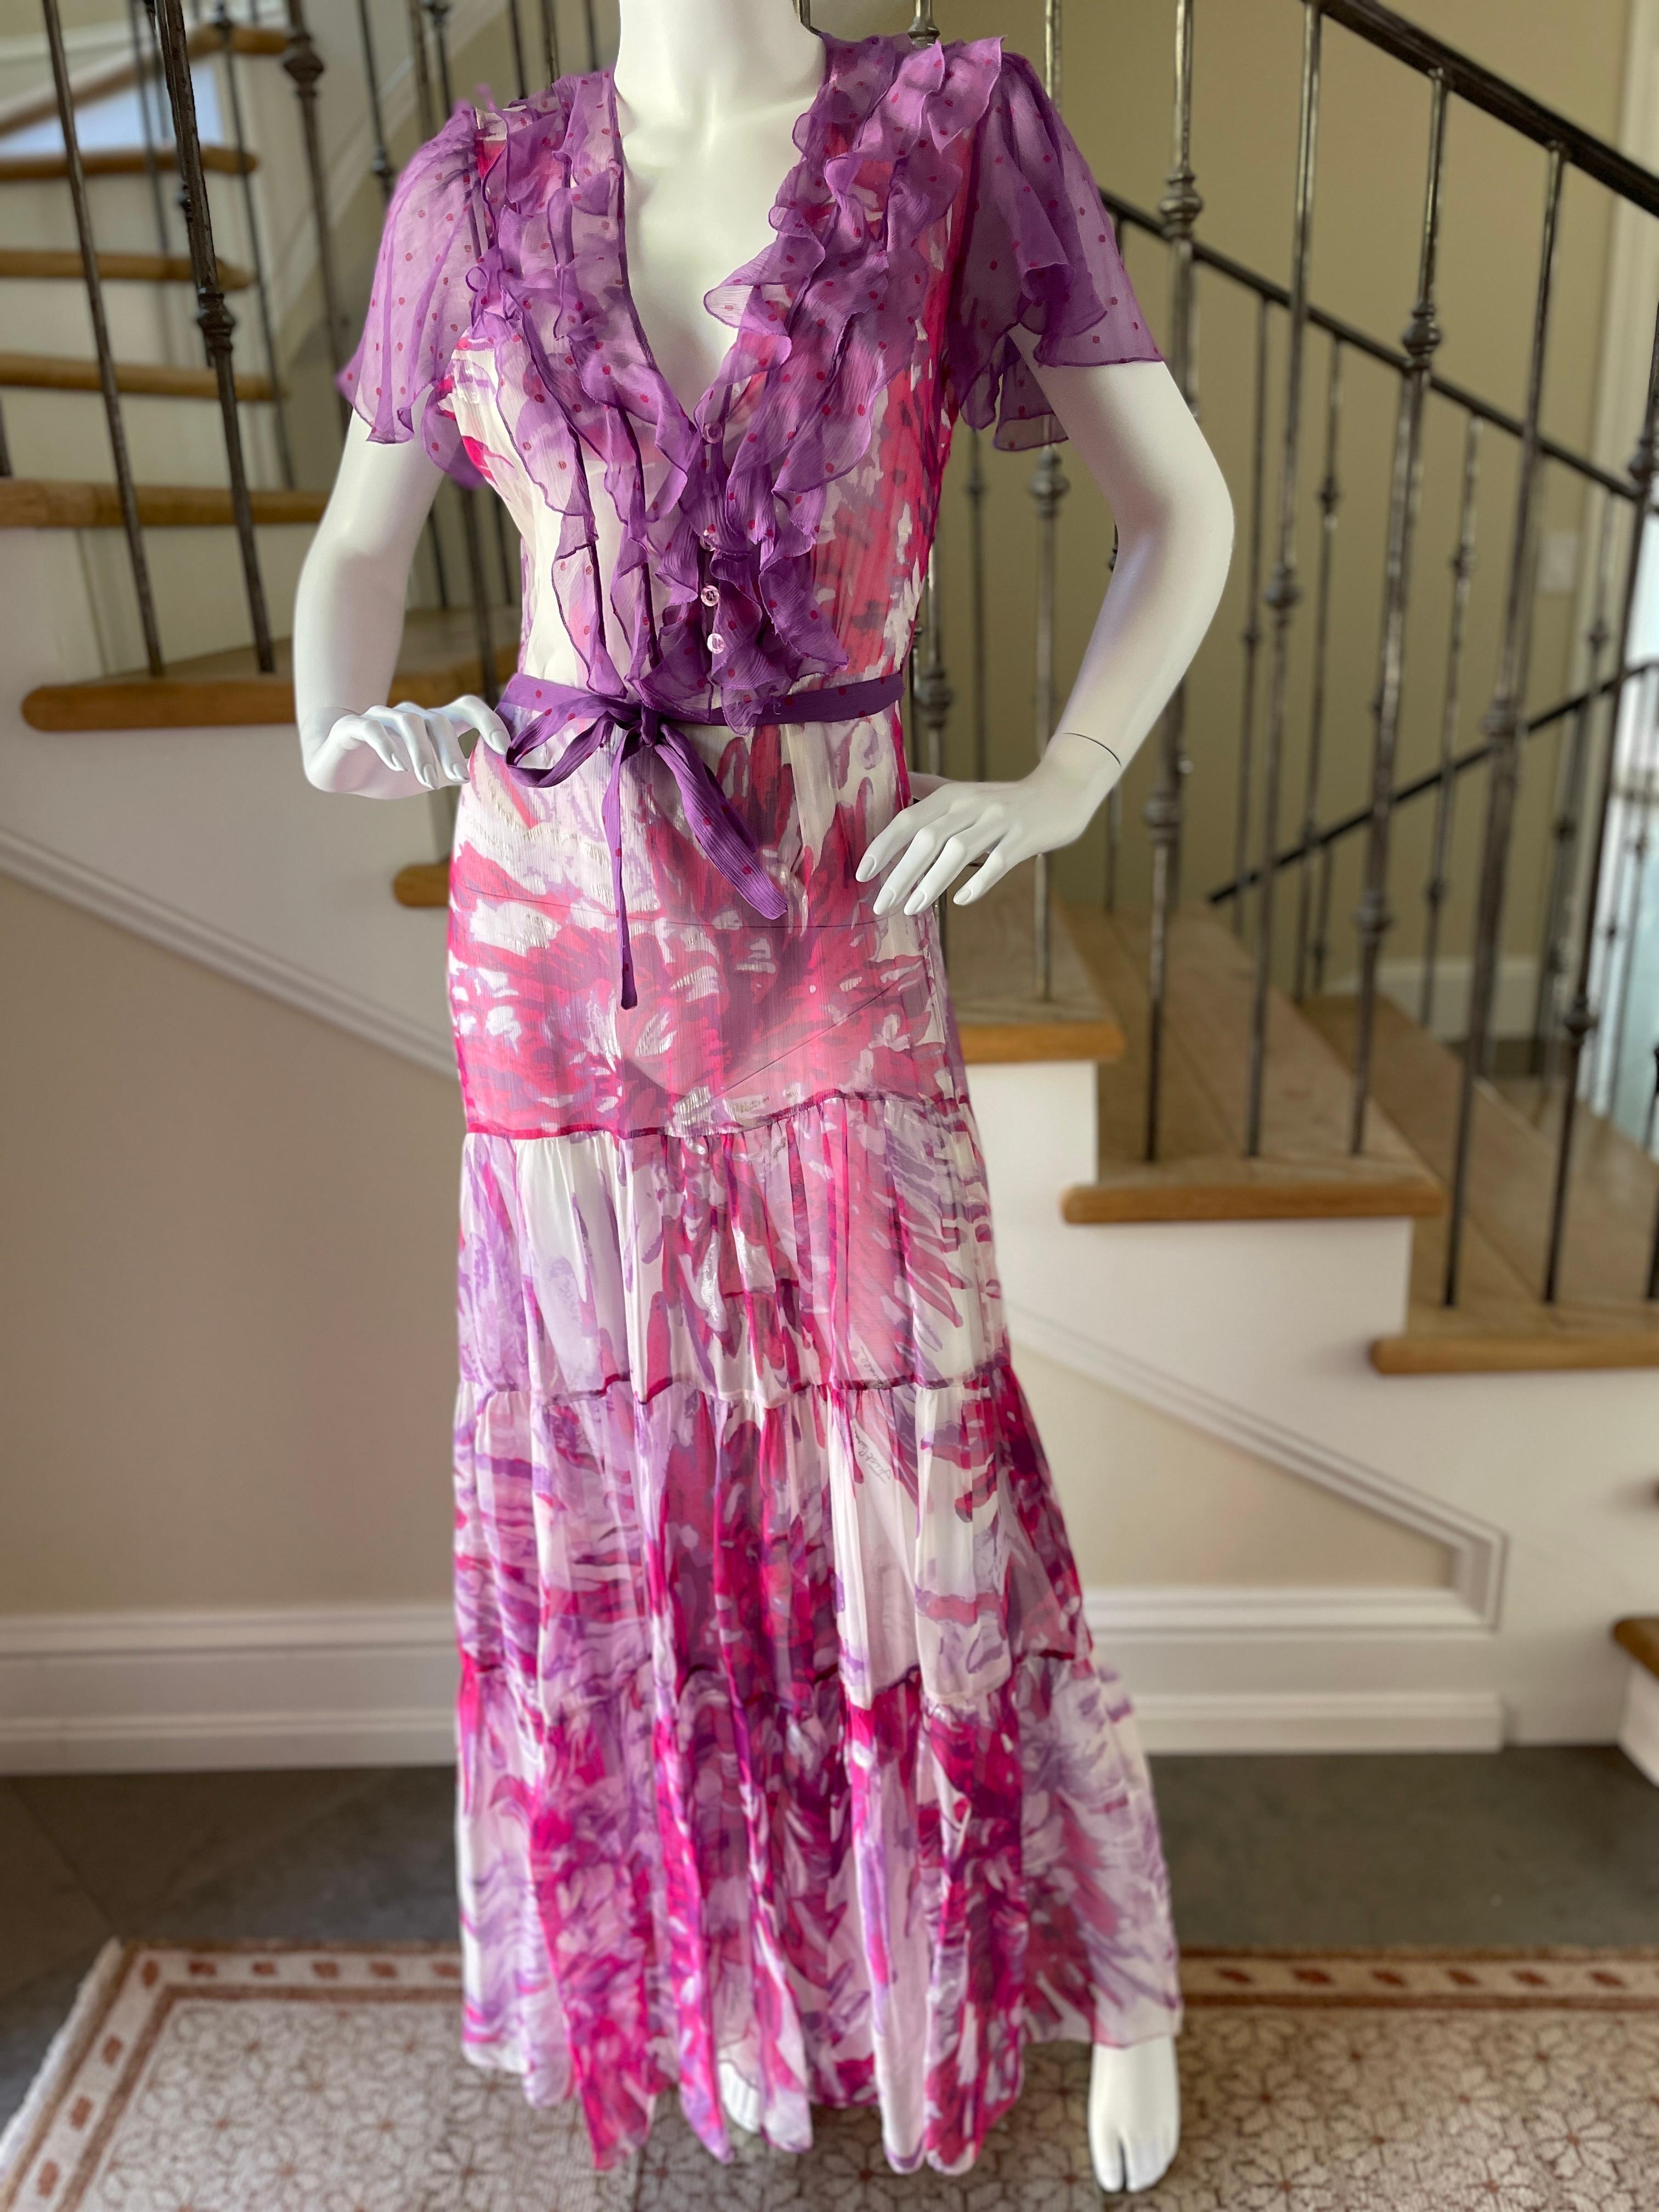 Roberto Cavalli Just Cavalli Vintage Sheer Silk Chiffon Dress w Flutter Sleeves In Excellent Condition For Sale In Cloverdale, CA